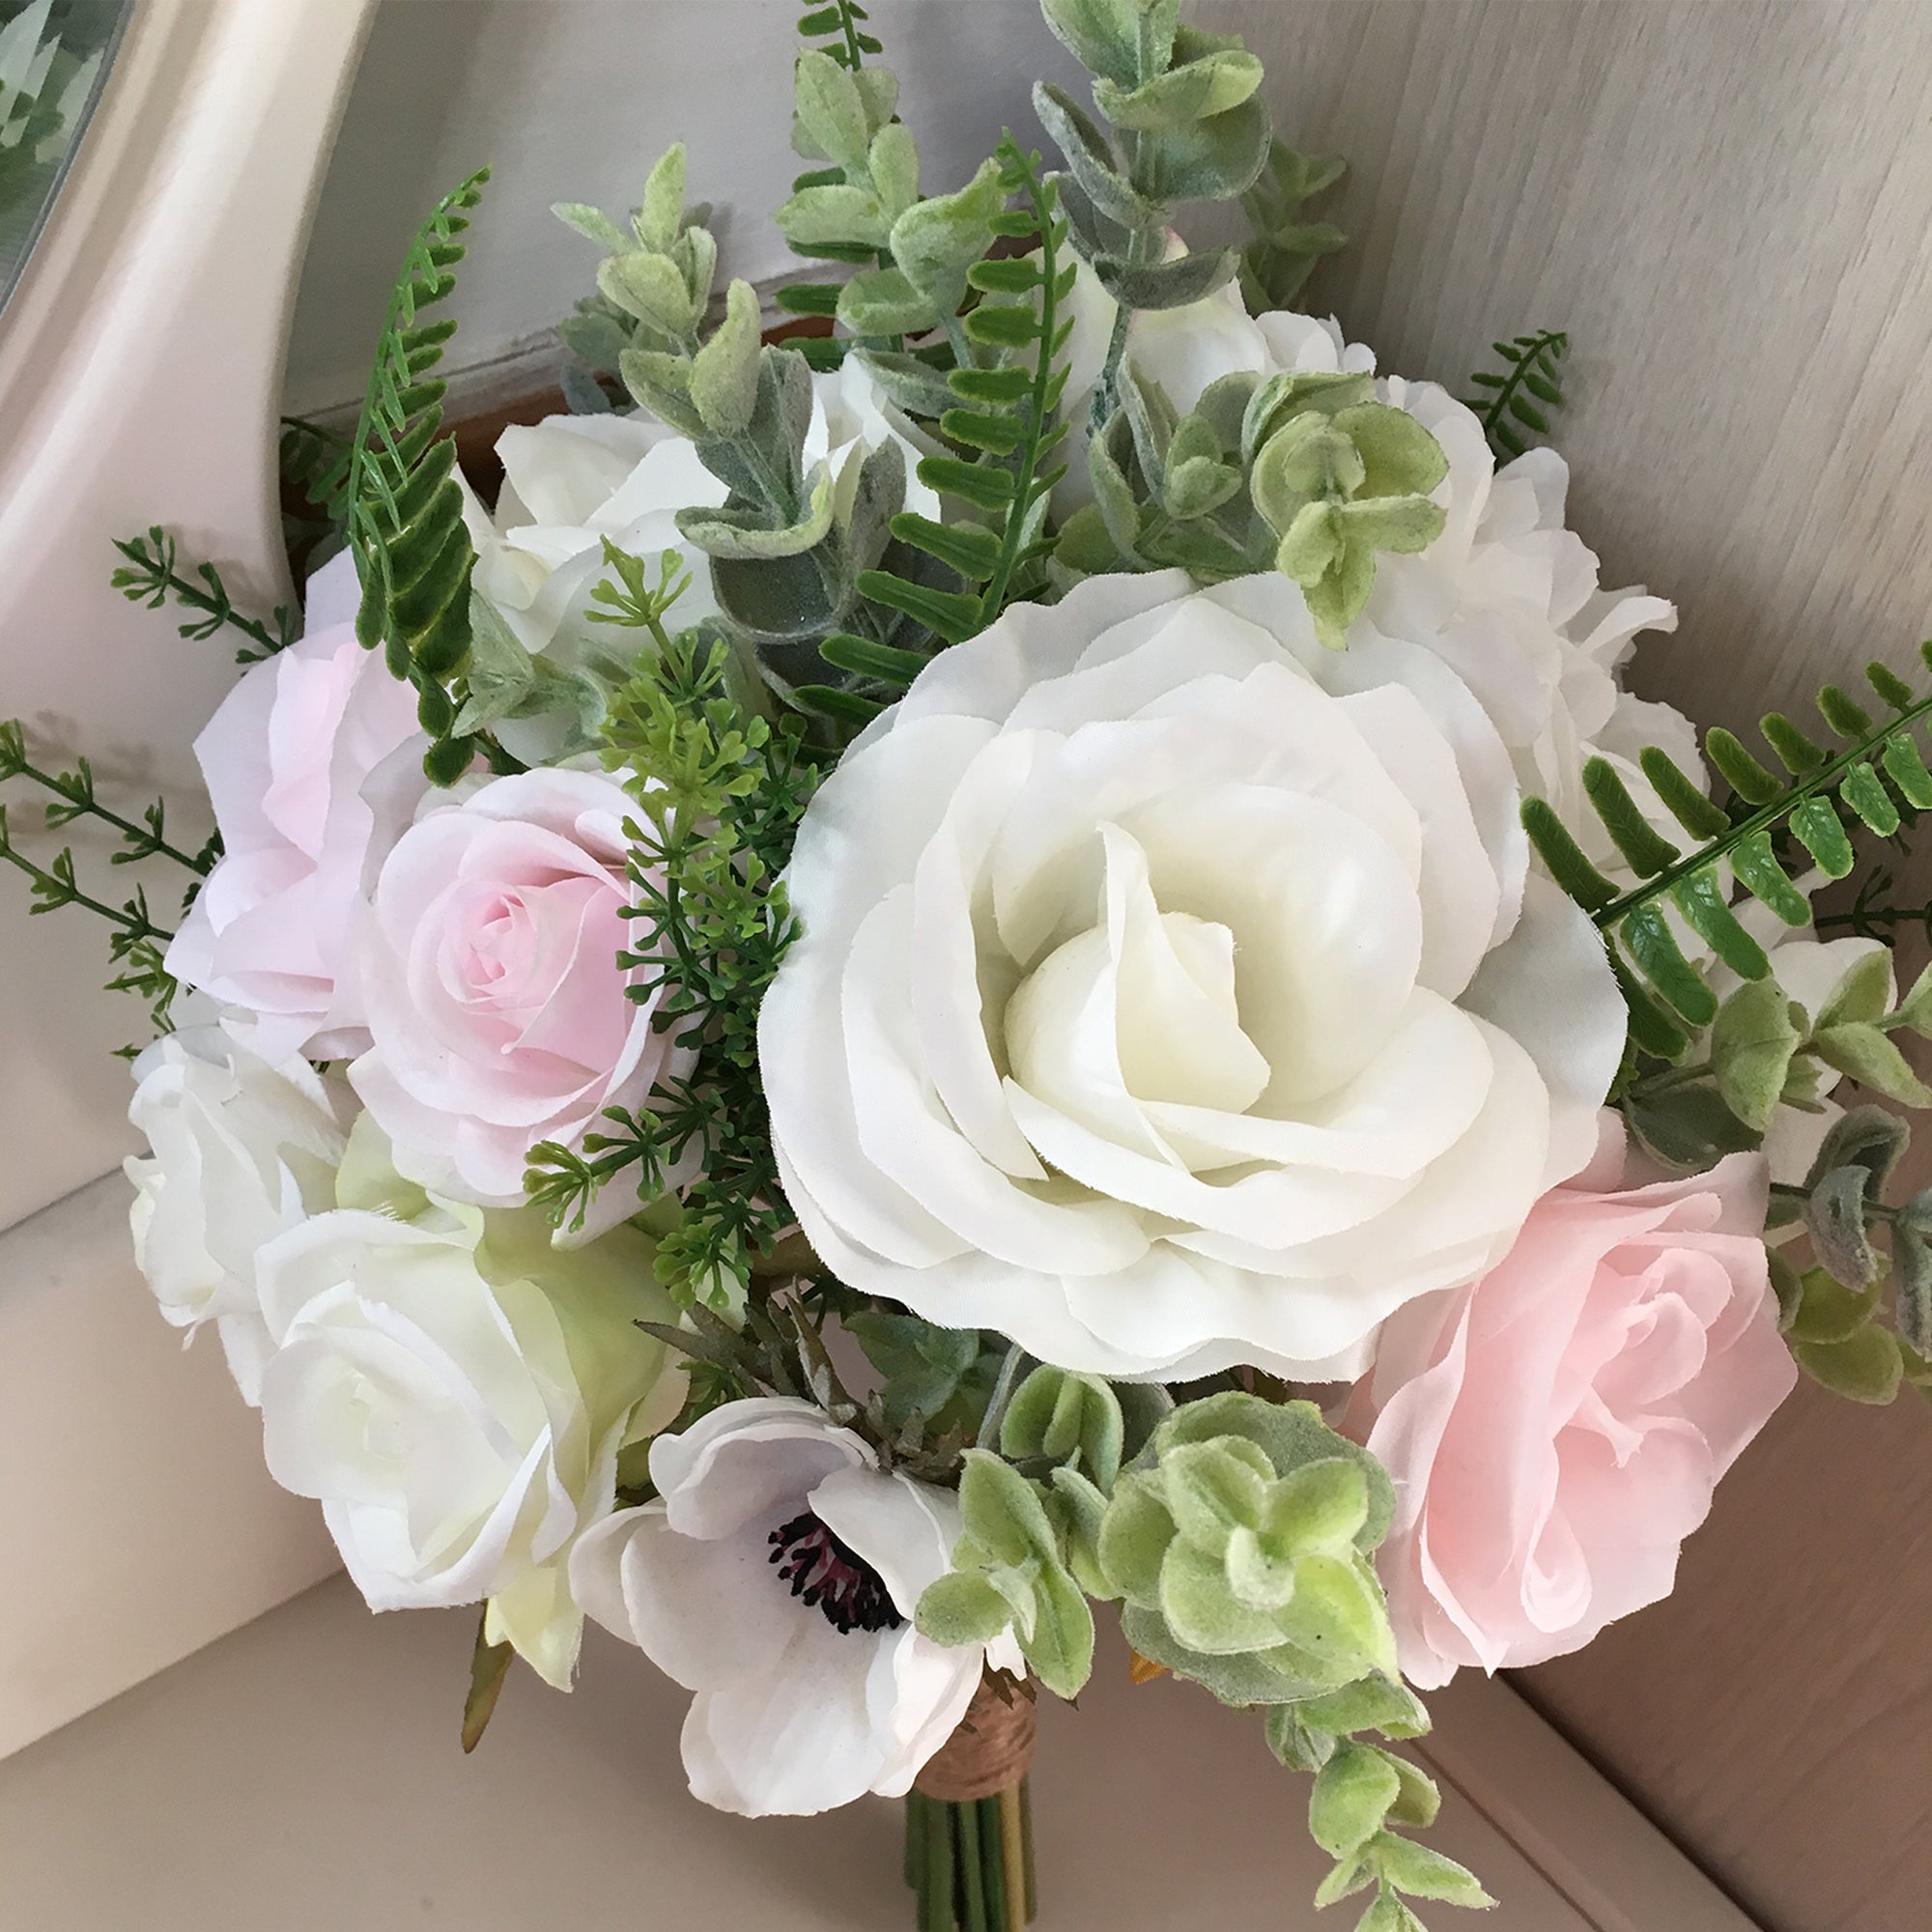 Boho Bridal Bouquet White and Pink Flowers